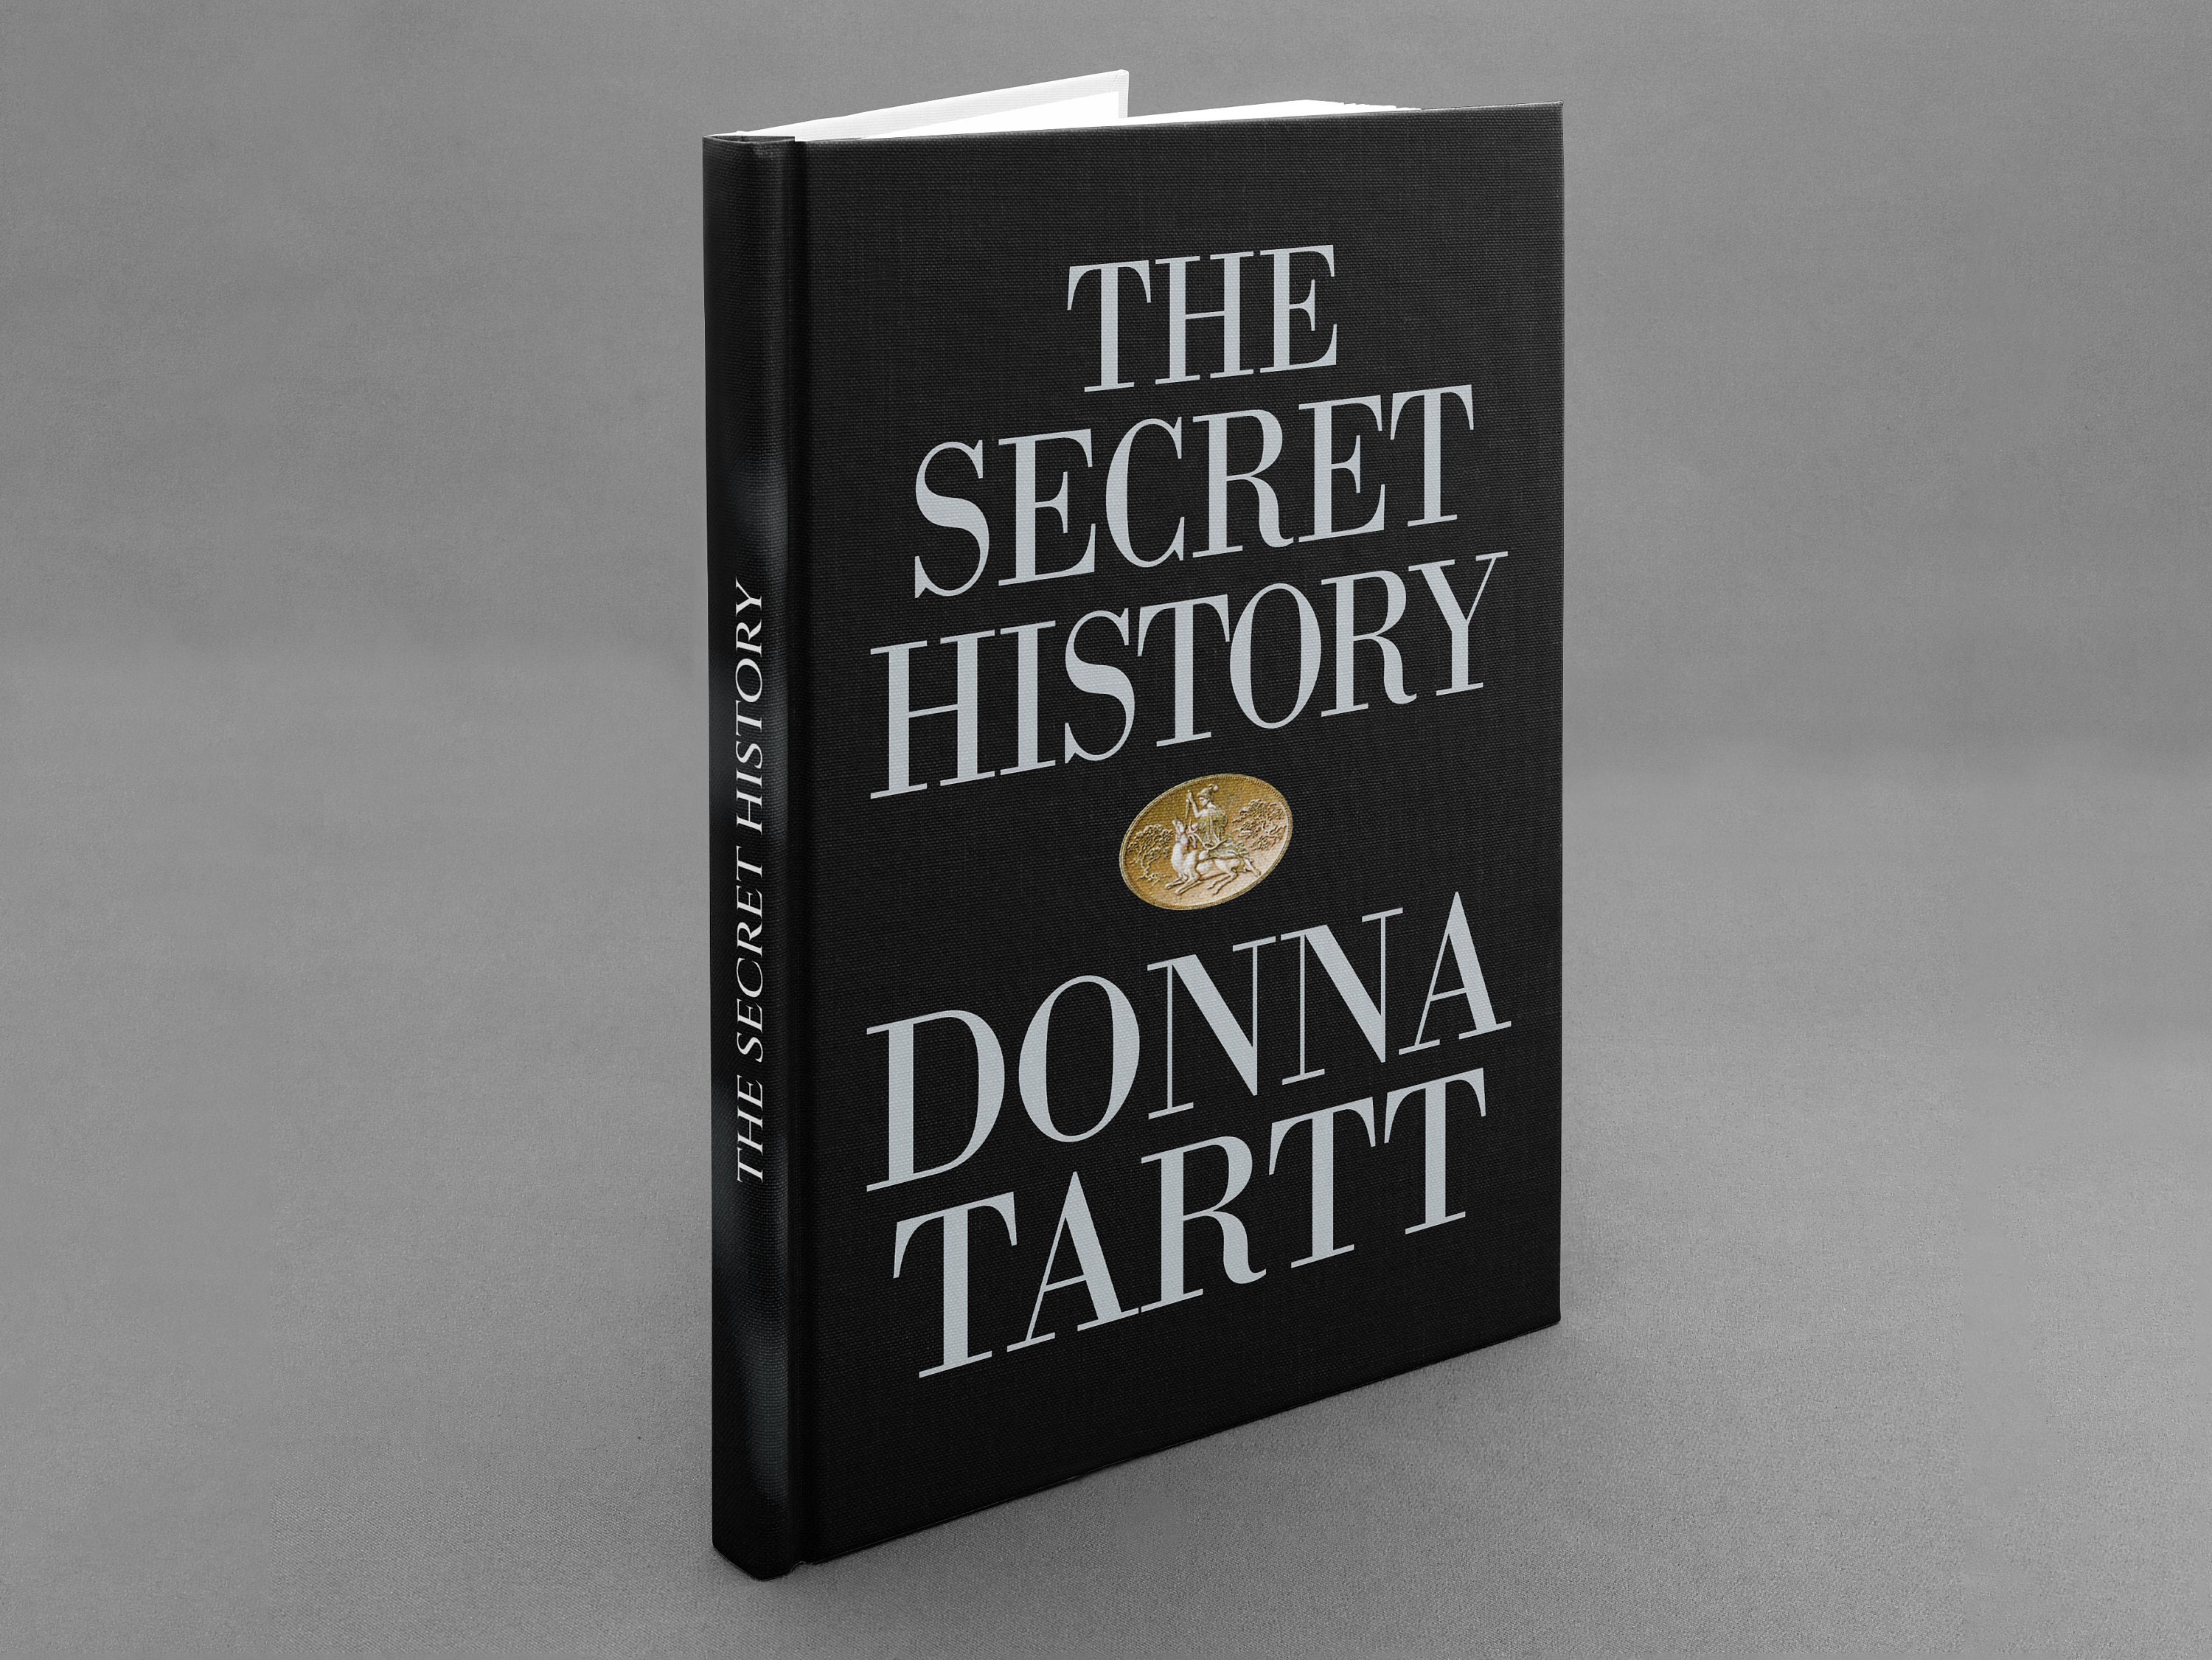 13 Extraordinary Facts About The Secret History - Donna Tartt 